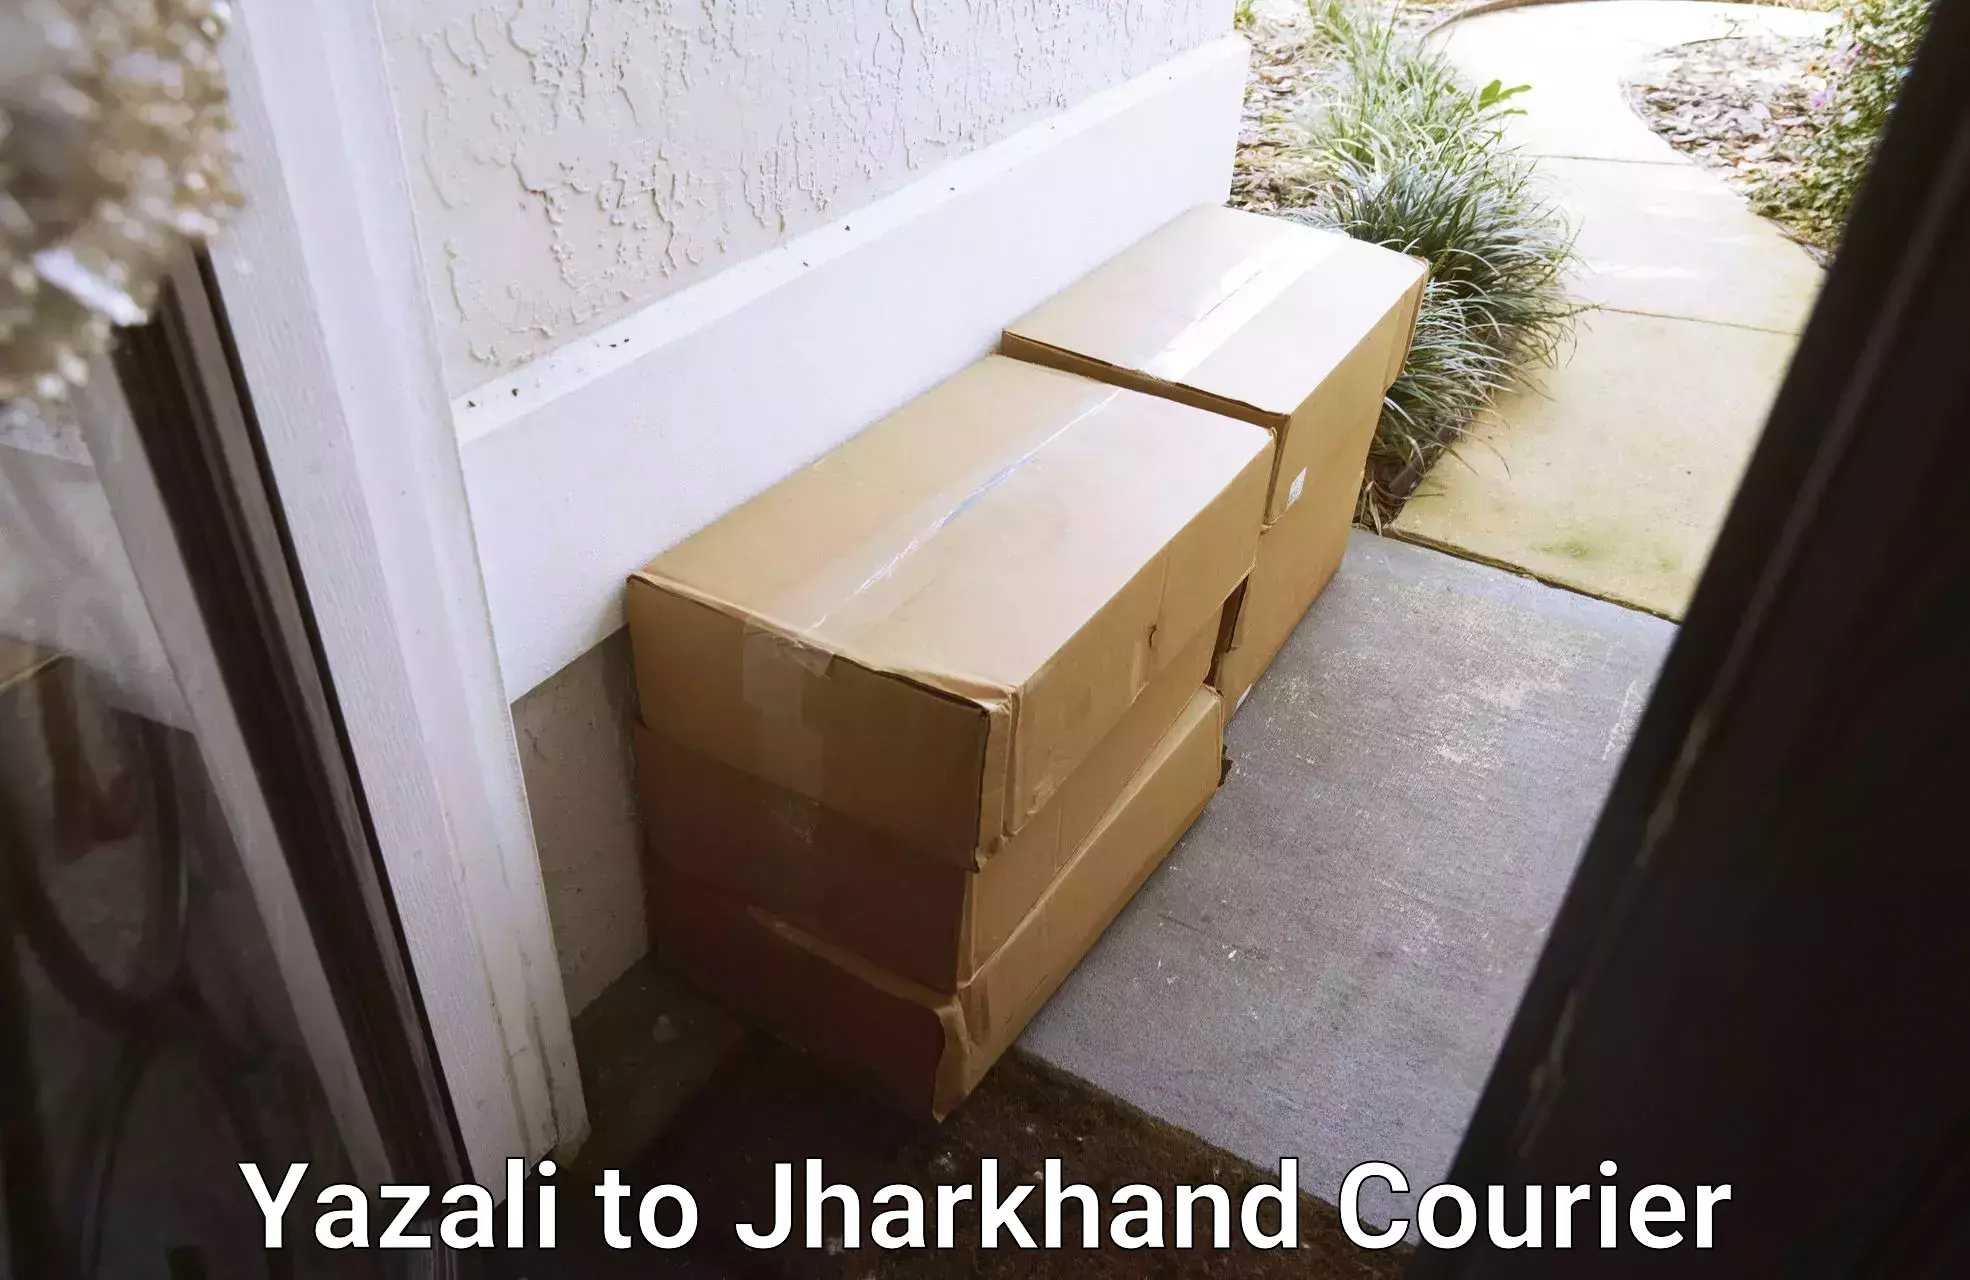 Full-service courier options Yazali to Jharkhand